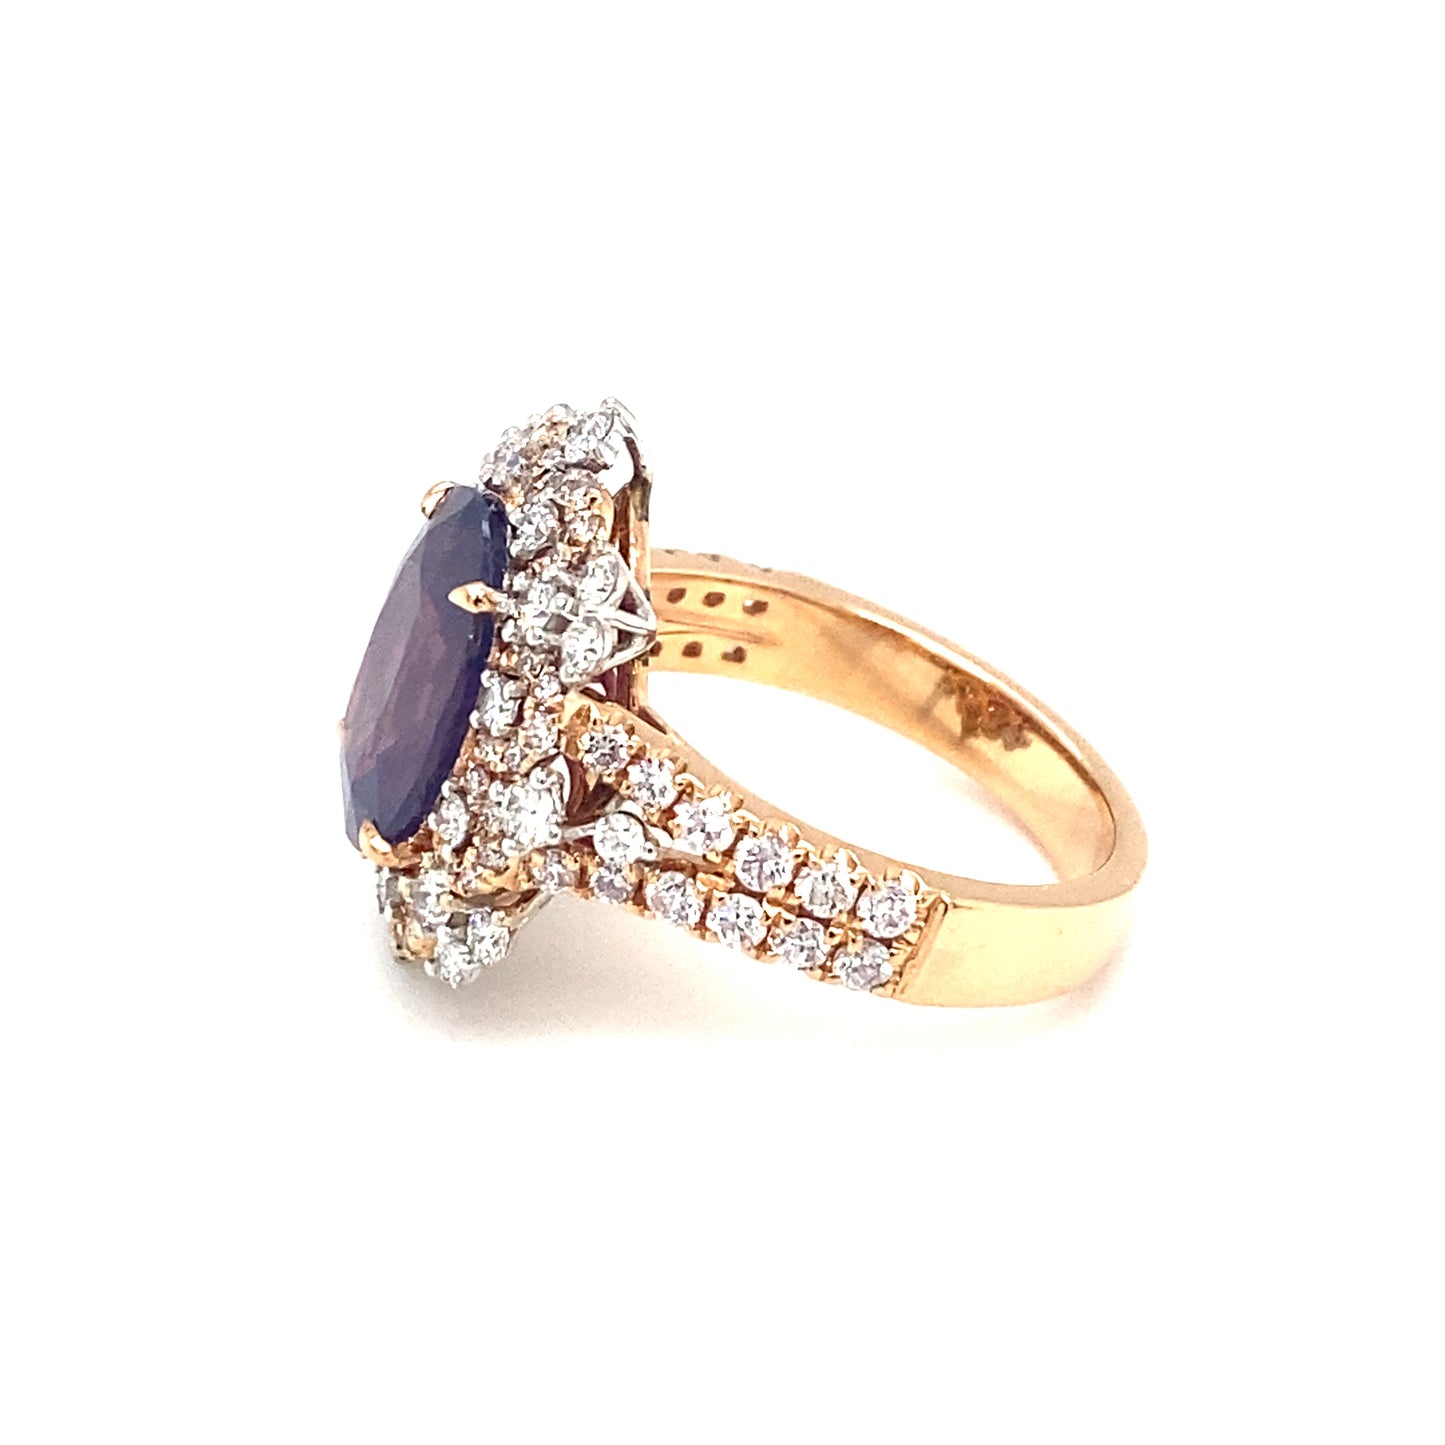 MODANI 3.0ct Oval Kashmir Sapphire and Diamond Ring in 18K Rose Gold